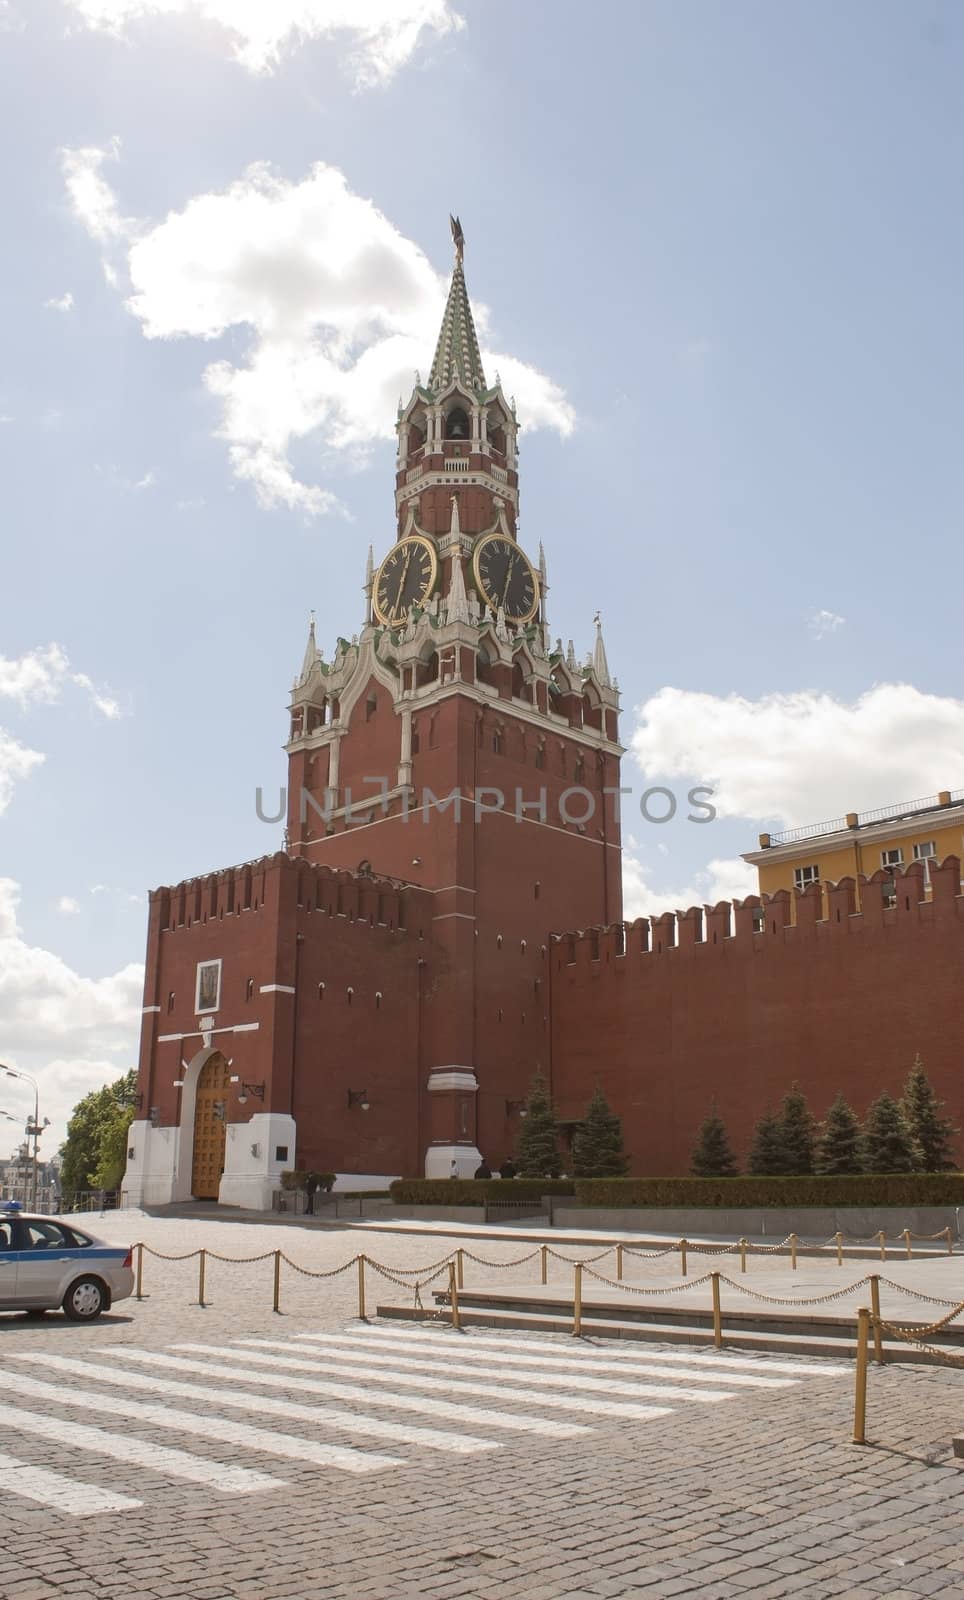 Spasskaya tower at Red Square in Moscow, Russia